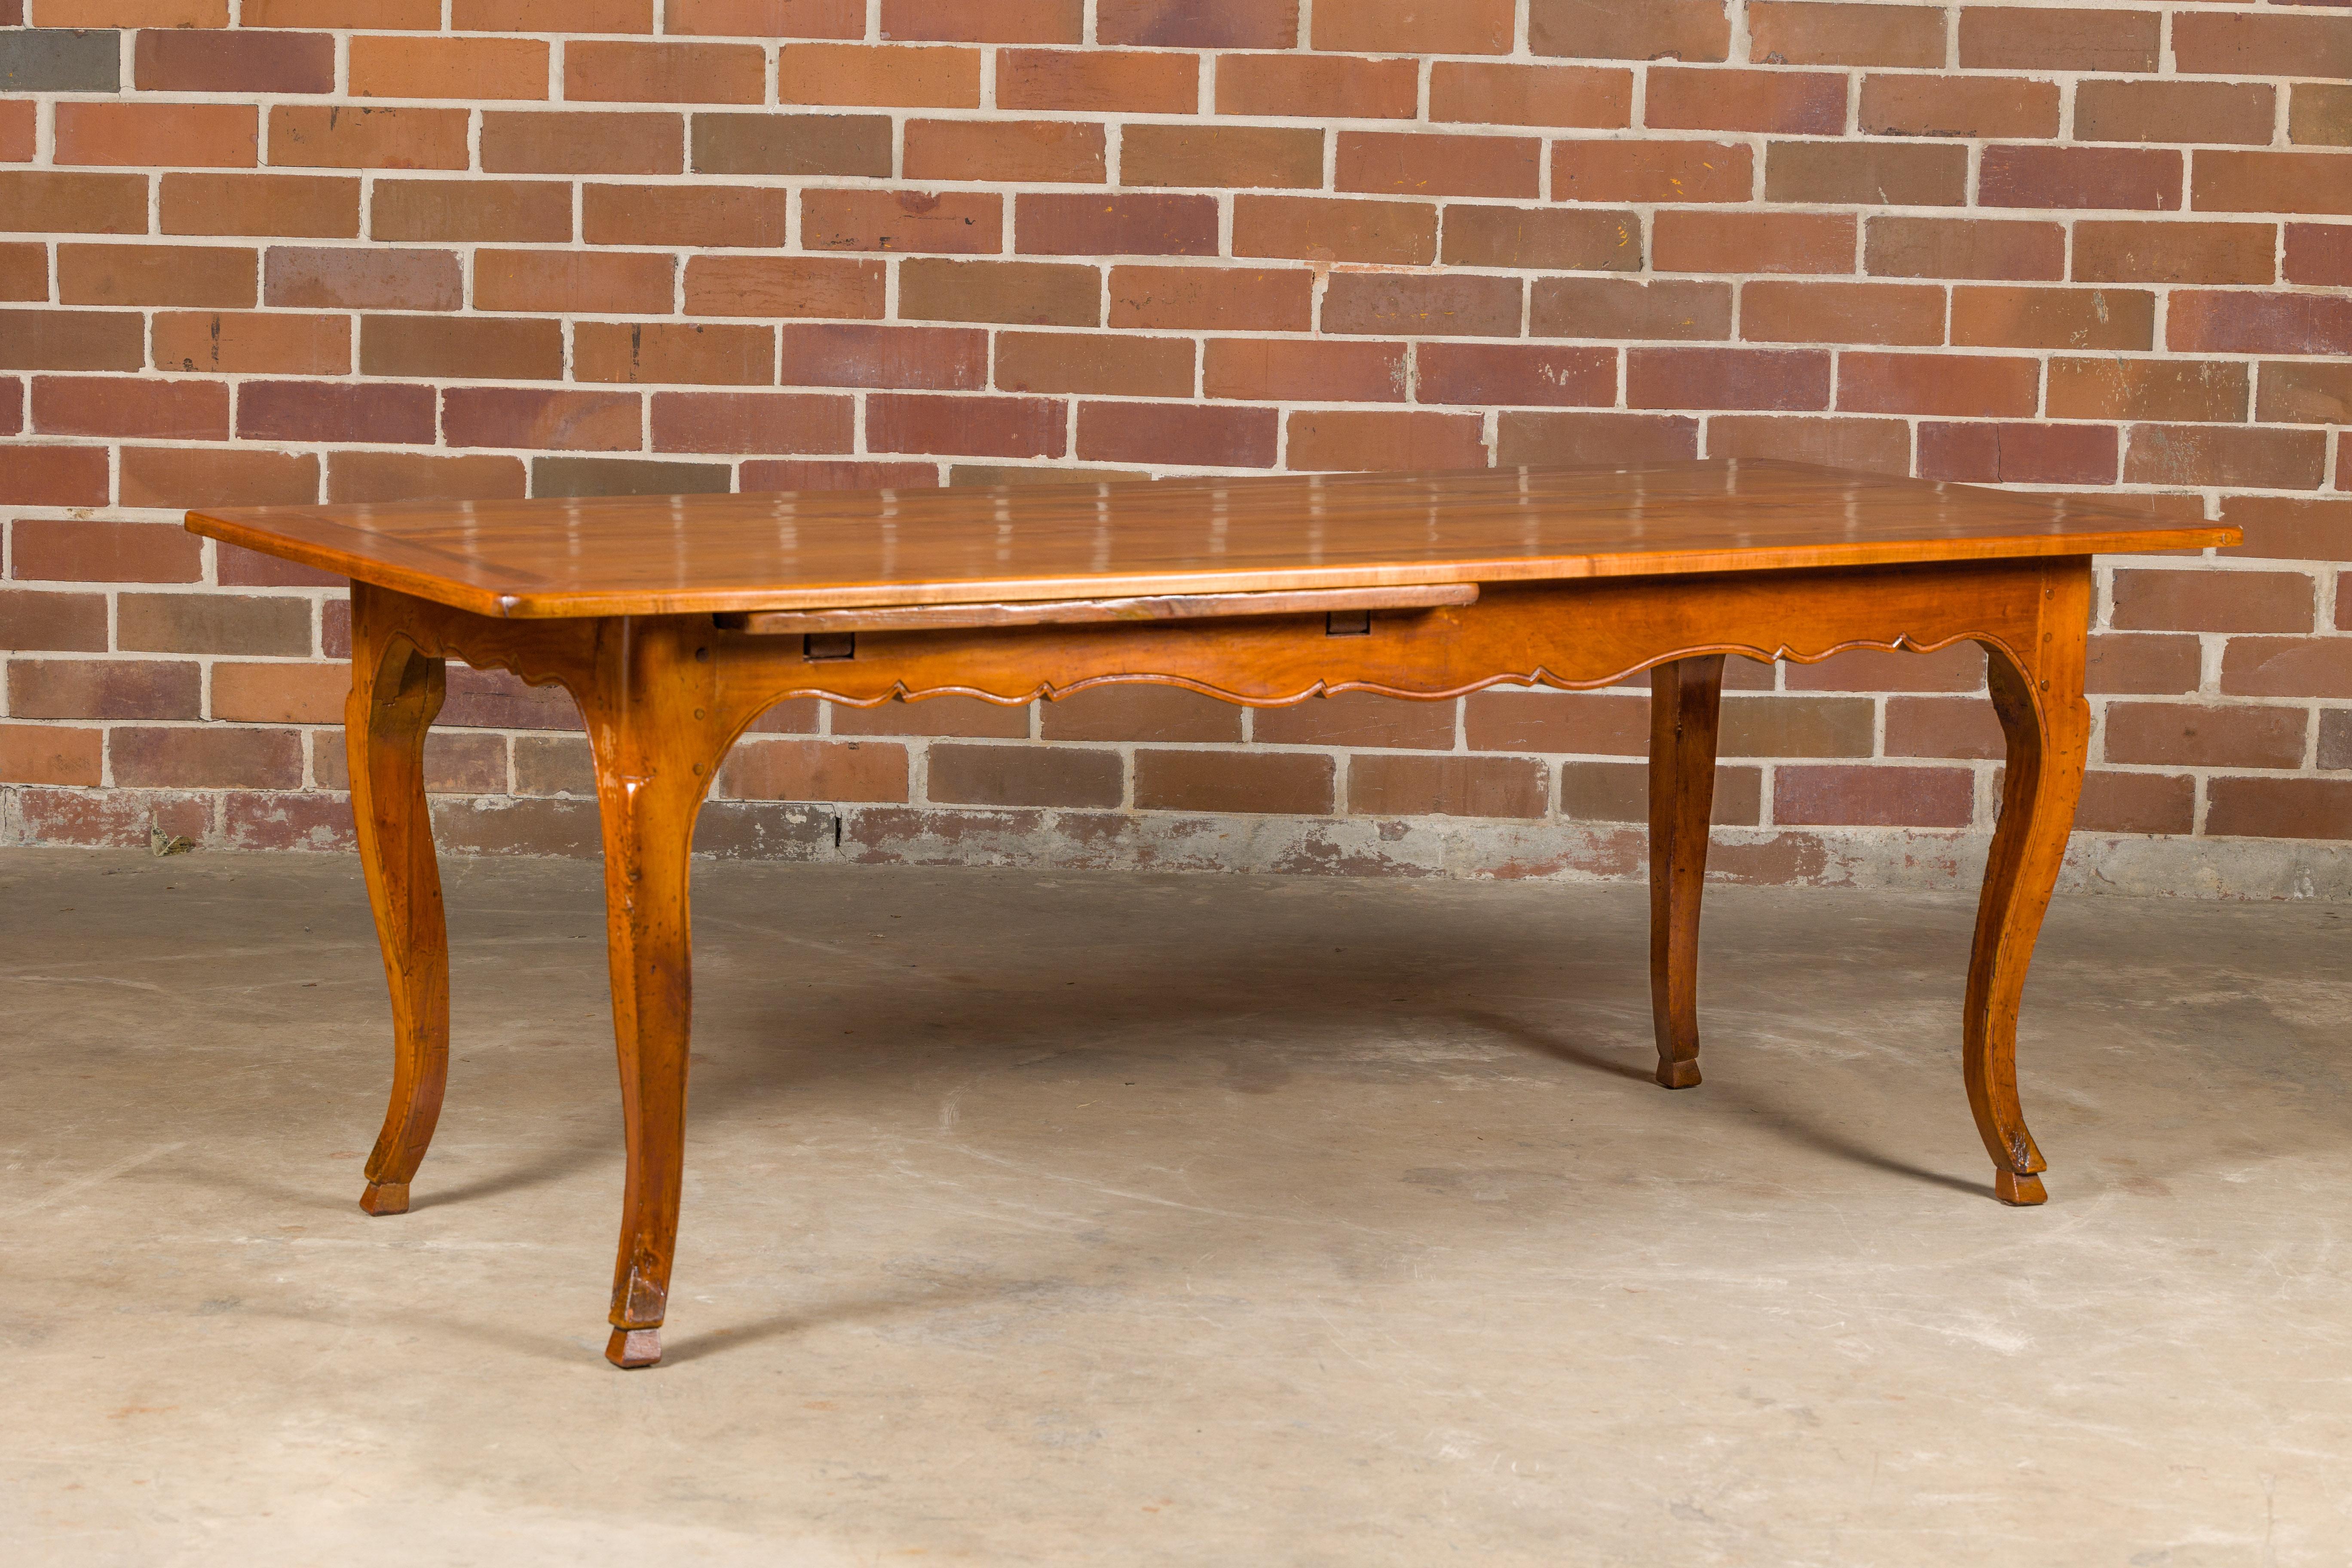 19th Century French Fruitwood Dining Table with Bread Board and Cabriole Legs For Sale 4